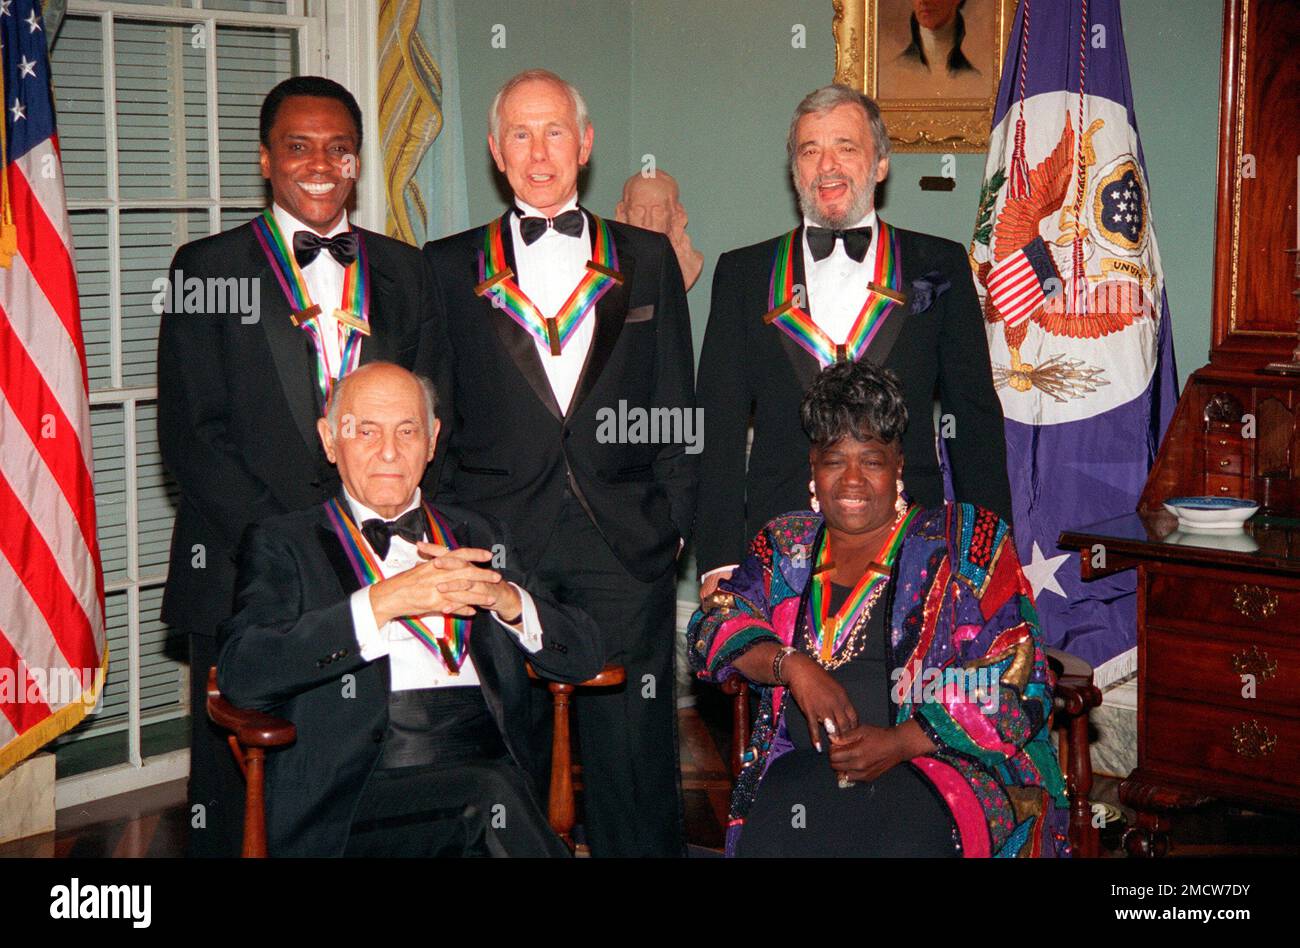 FILE - The Kennedy Center Honors recipients of 1993, are, founder of the Dance Theater of Harlem Arthur Mitchell, from left, entertainer Johnny Carson, composer-lyricist Stephen Sondheim; sitting from left, conductor Georg Solti and singer Marion Williams posing for a portrait wearing their medals following a dinner in their honor at the State Department in Washington, D.C., on Dec. 4, 1993. Sondheim, the songwriter who reshaped the American musical theater in the second half of the 20th century, has died at age 91. Sondheim's death was announced by his Texas-based attorney, Rick Pappas, who t Banque D'Images